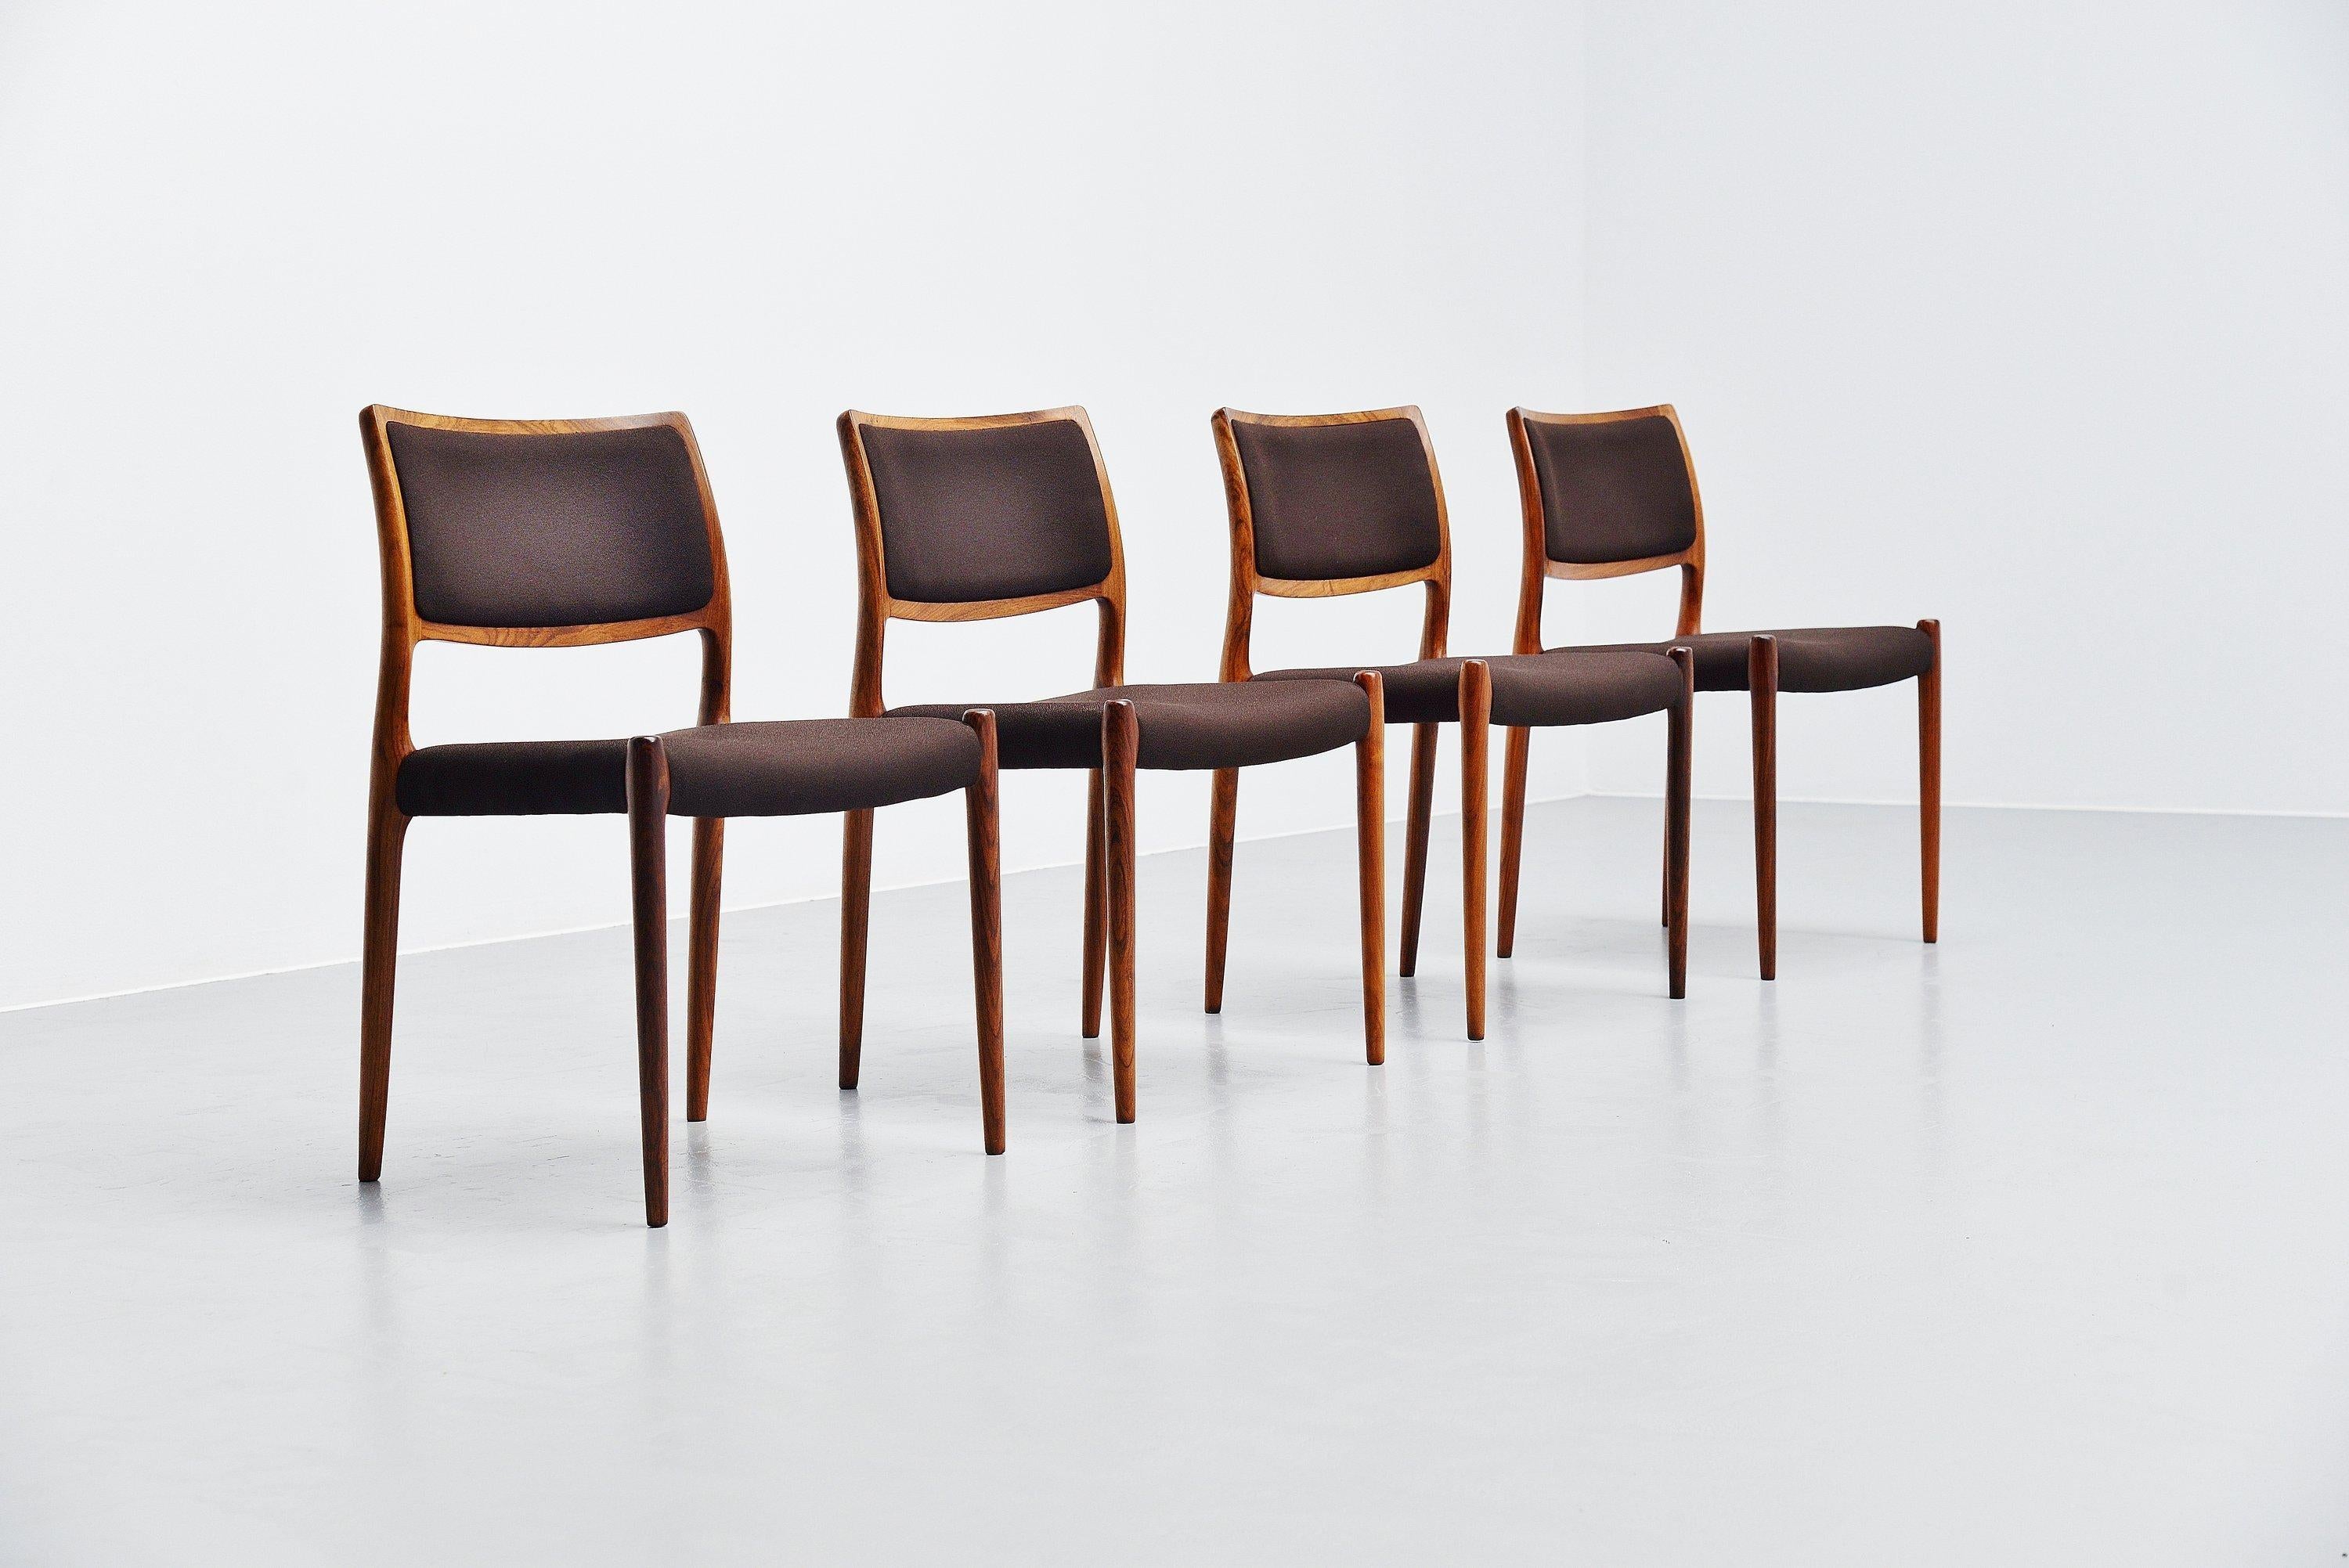 Nice set of 4 dining chairs model 80 designed by Niels Møller and manufactured by J.L Møllers Møbelfabrik, Denmark, 1968. These chairs have a solid rosewood structure which is still in very nice original condition with a nice patina. The chairs are